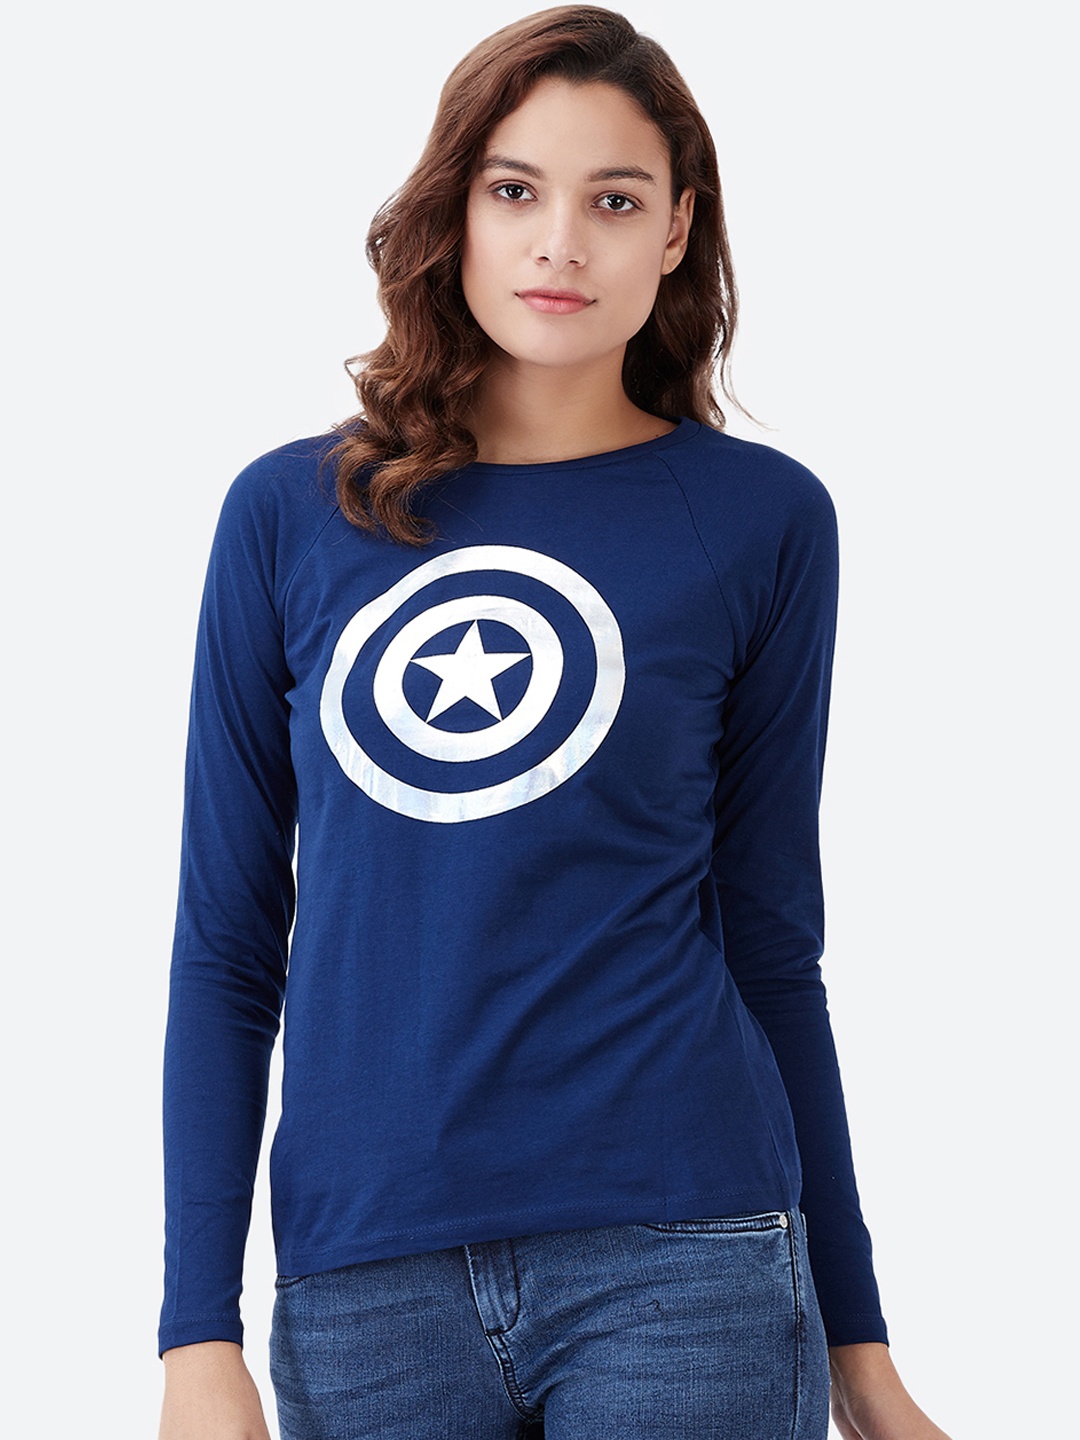 

Free Authority Captain America Featured Navy Tshirt for Women, Navy blue